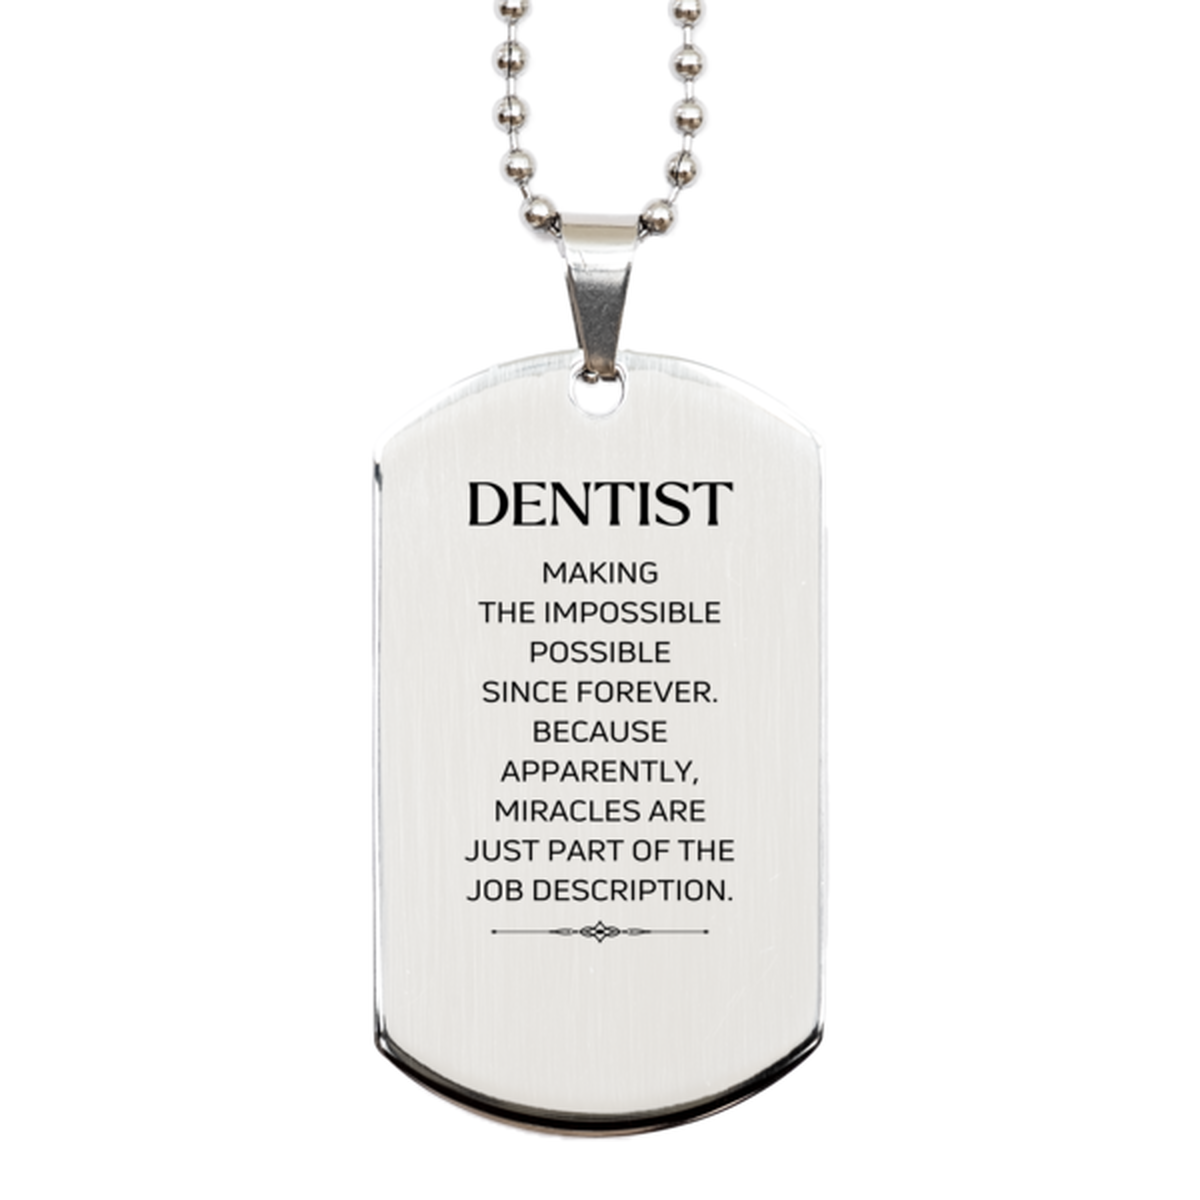 Funny Dentist Gifts, Miracles are just part of the job description, Inspirational Birthday Silver Dog Tag For Dentist, Men, Women, Coworkers, Friends, Boss